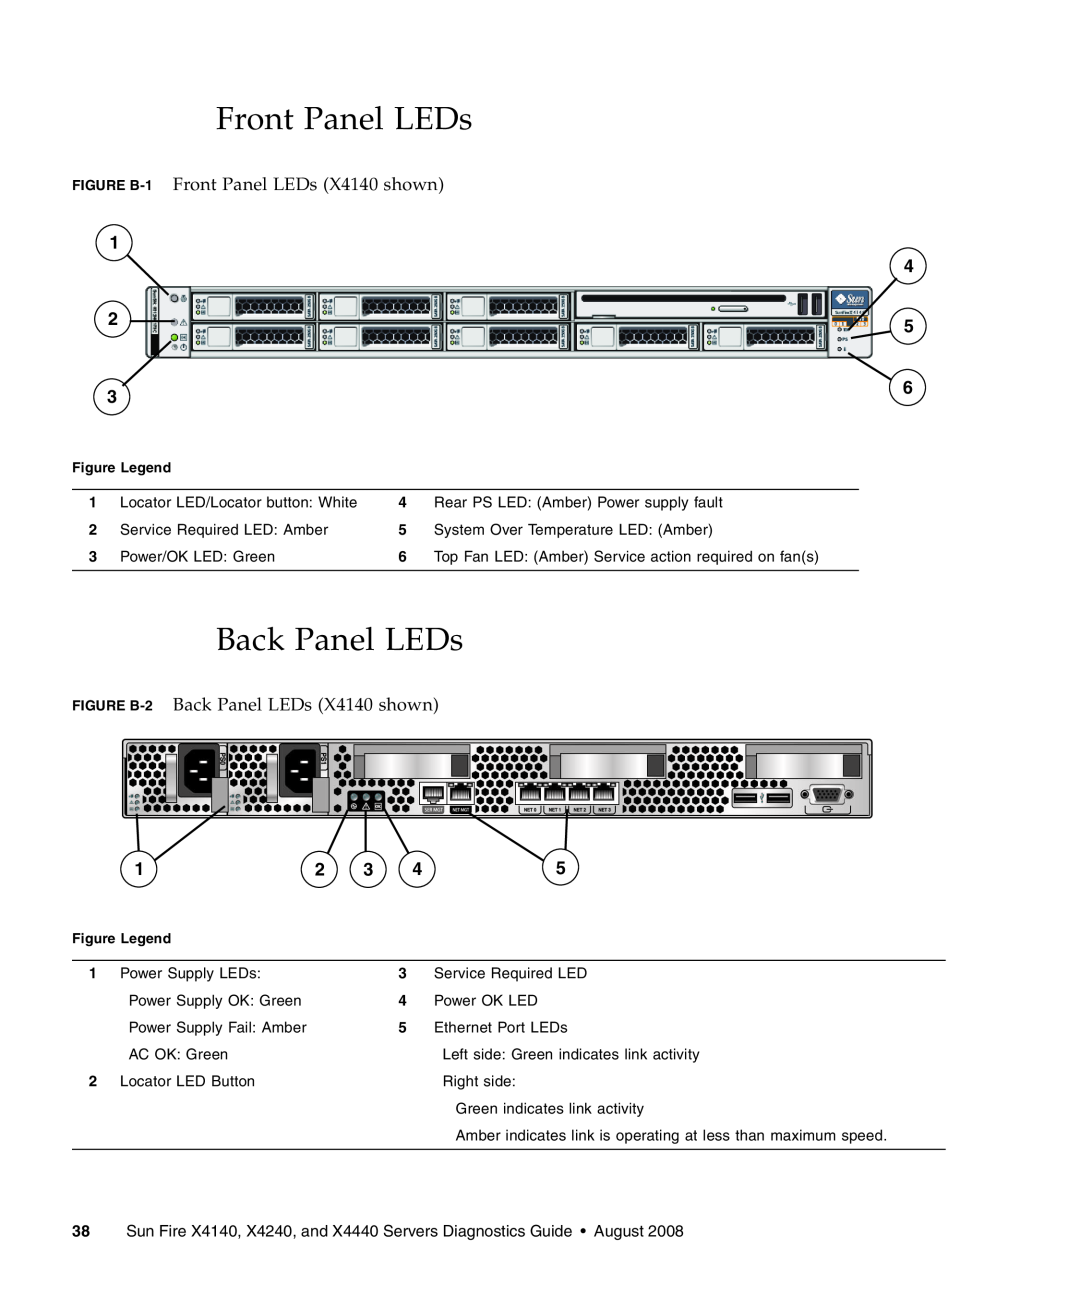 Sun Microsystems X4240 Front Panel LEDs, Back Panel LEDs, Locator LED/Locator button White, Service Required LED Amber 